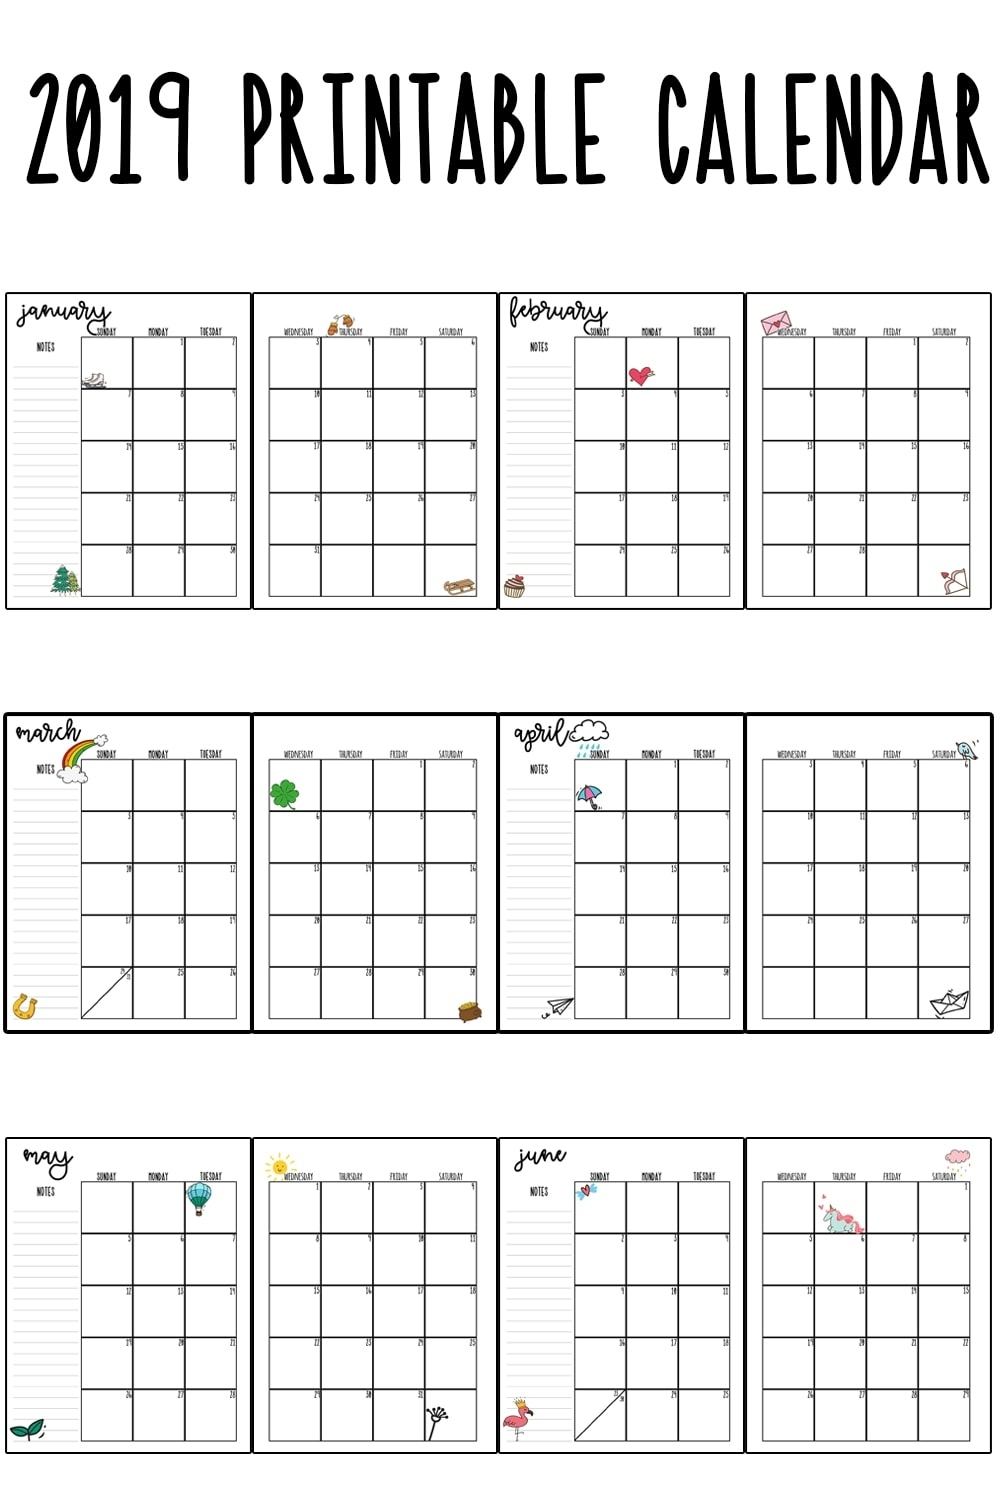 Printable Yearly Calendar With Lines  Calendar throughout Printable Monthly Calendar With Lines